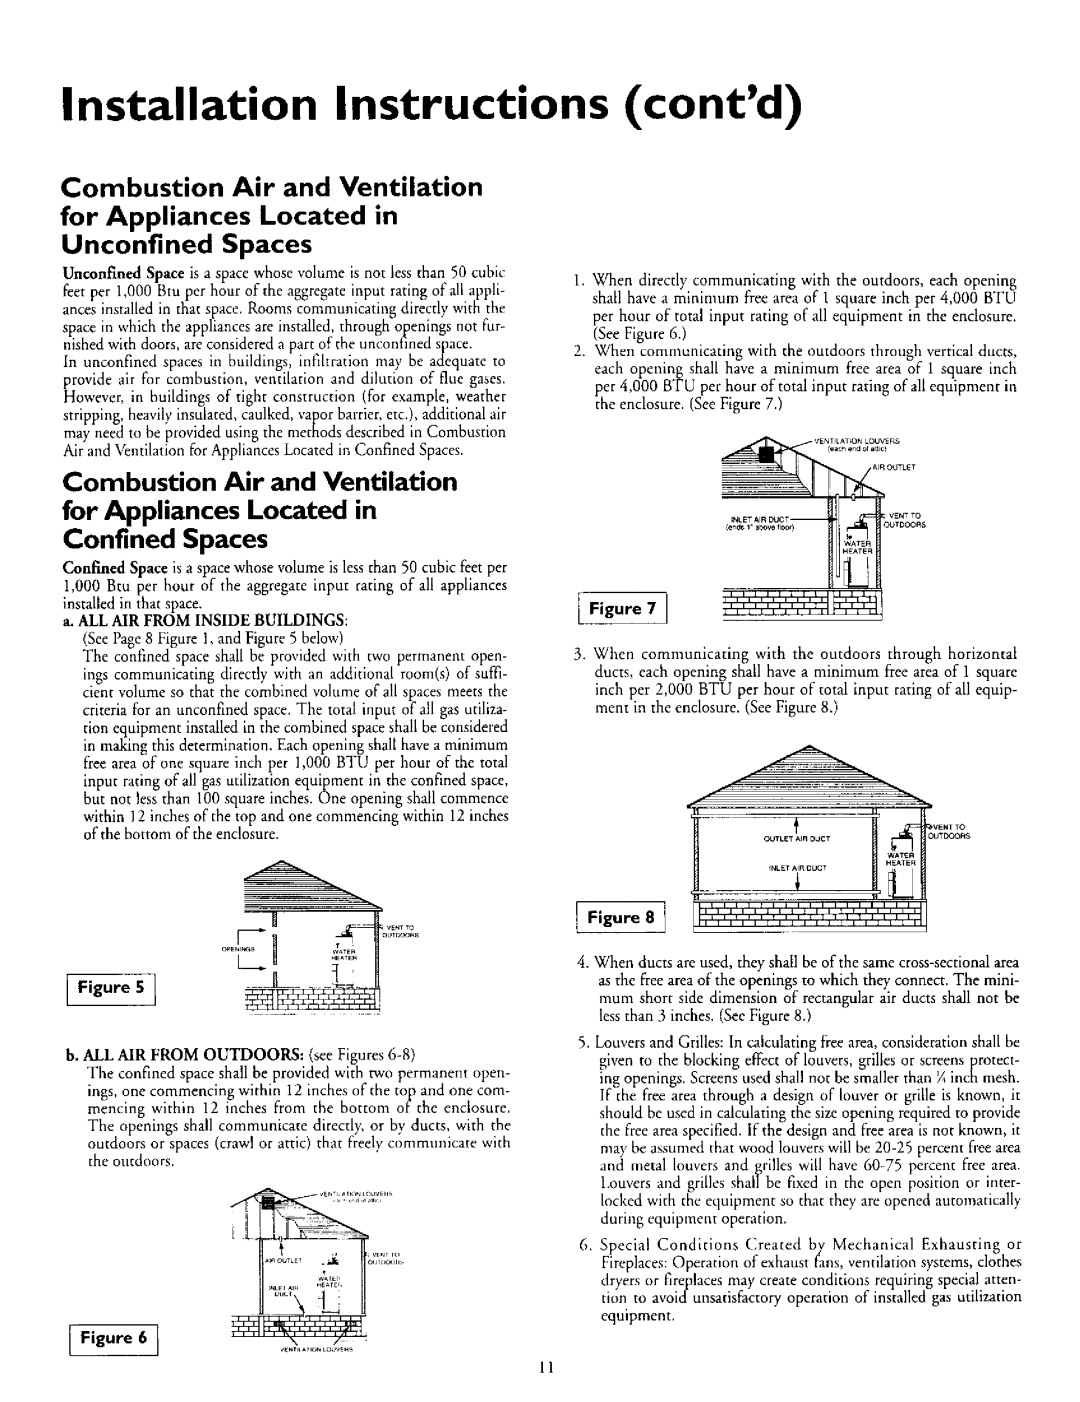 Kenmore 153.335916, L53.335816, 153.335942 Installation Instructions contd, for Appliances Located in Unconfined Spaces 